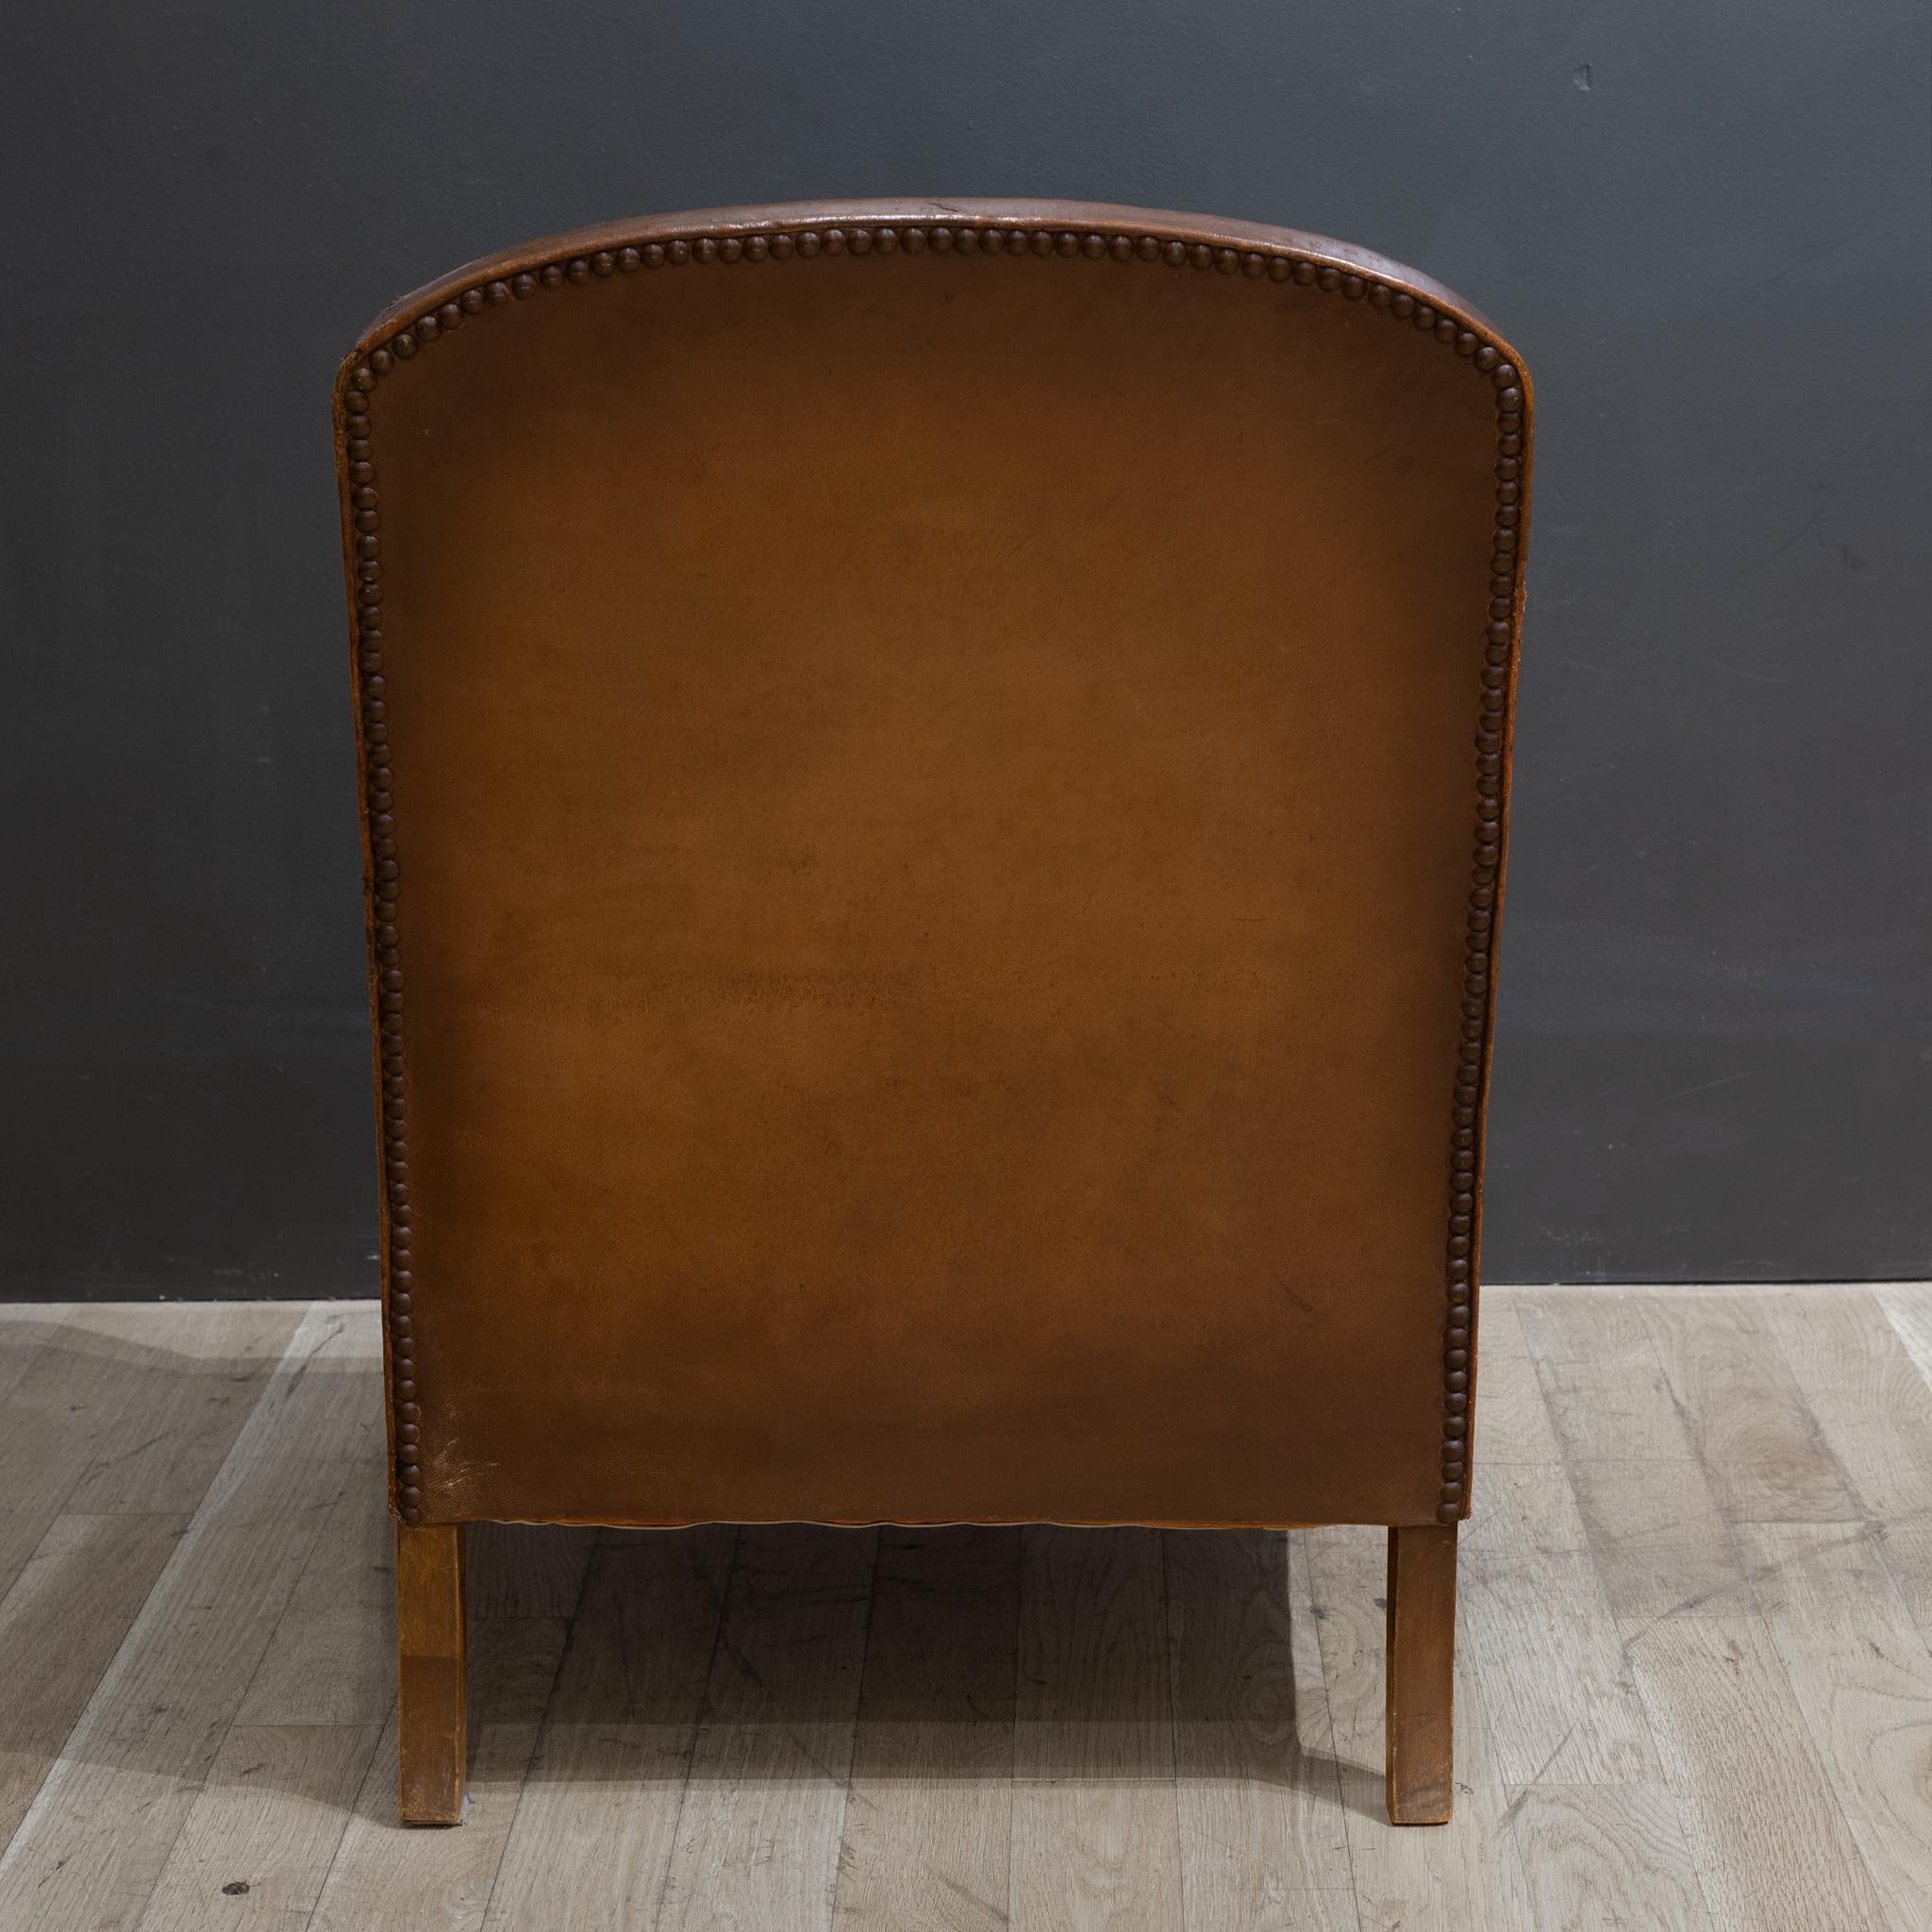 Sheepskin Early 20th c. French Library Club Chair c.1930-1940